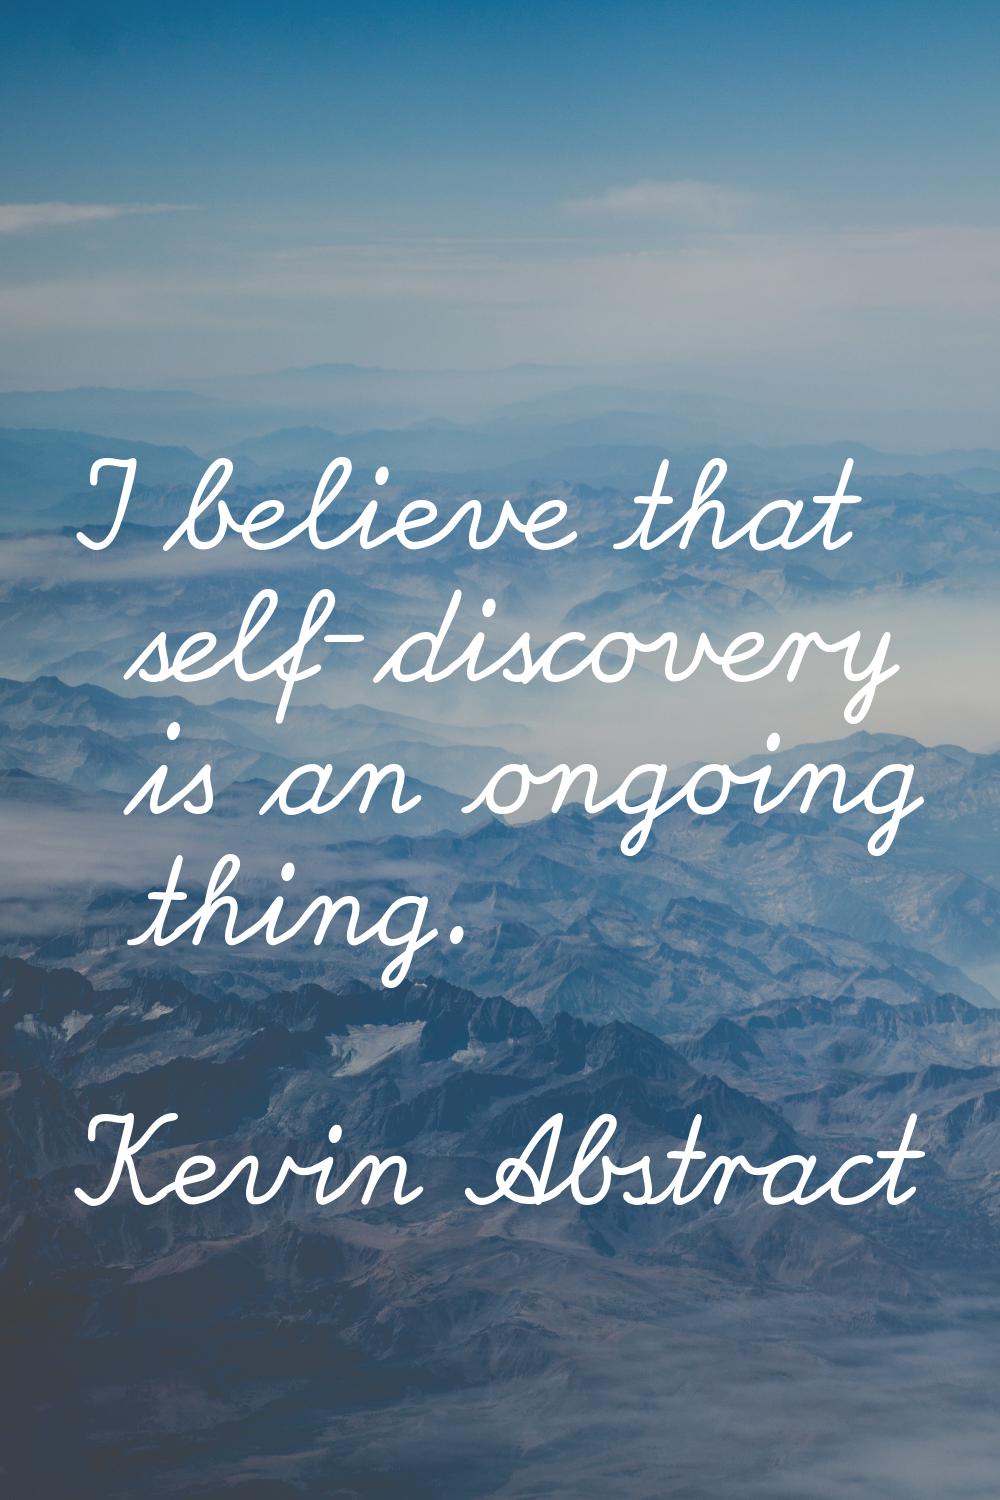 I believe that self-discovery is an ongoing thing.